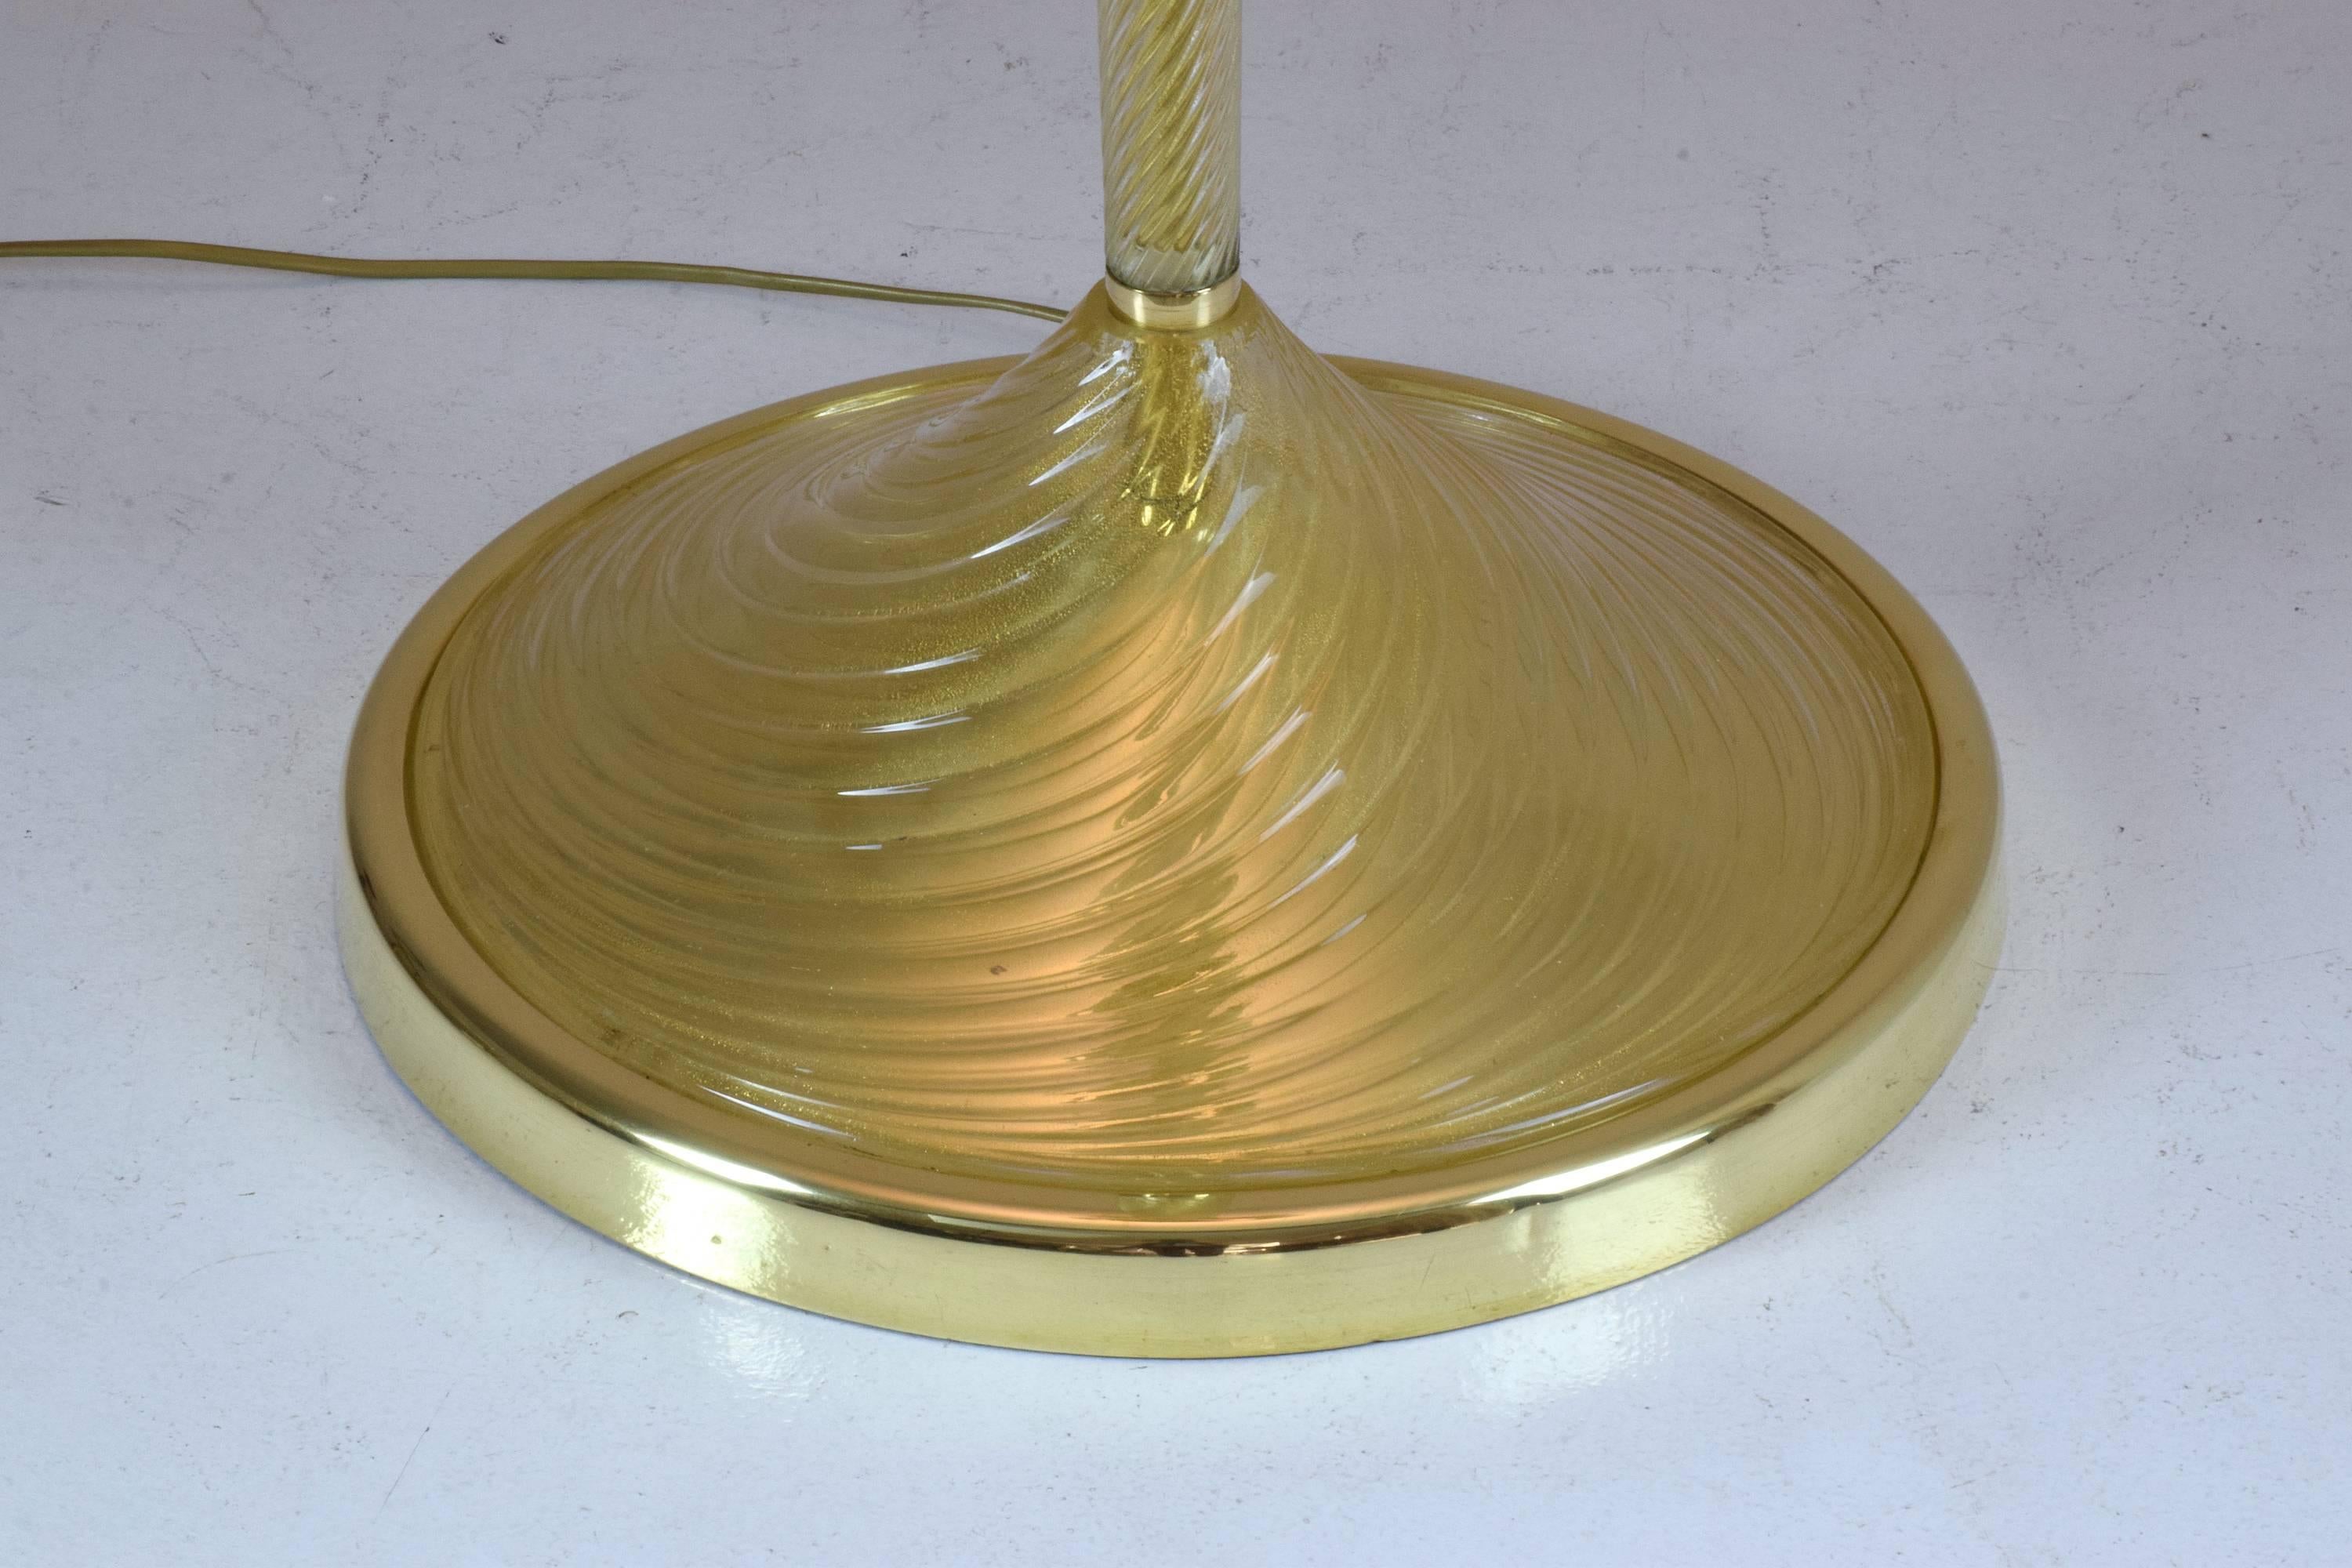 Italian Gold Murano Floor Lamp by Barovier Ercole, 1950s For Sale 1